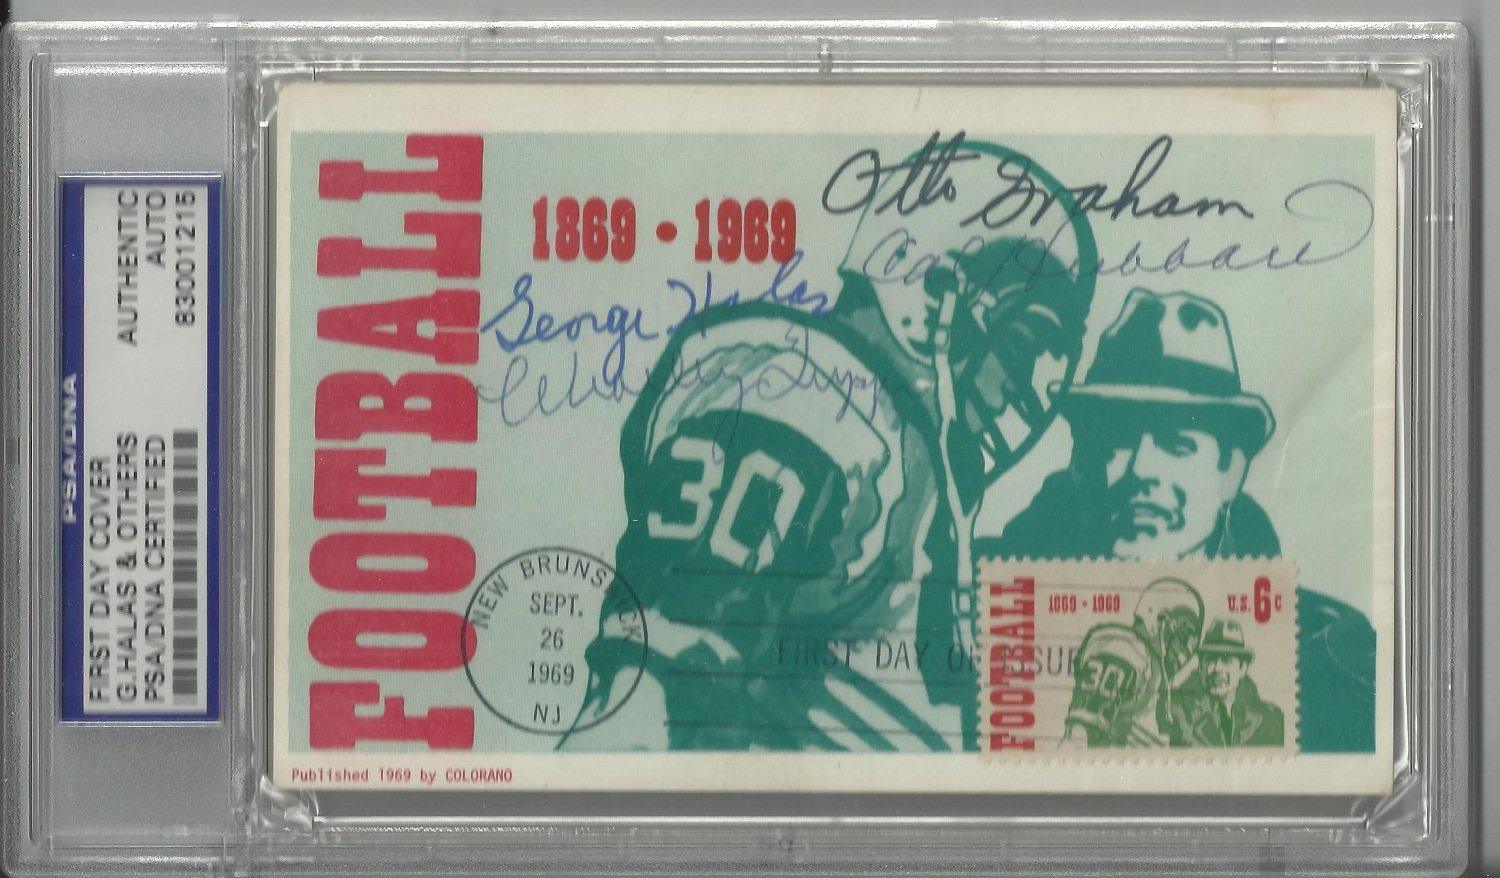 1969 nfl 100th anniversary first day cover signed by 4 hall of famers hallas hubbard graham trippi p certificate of authenticity